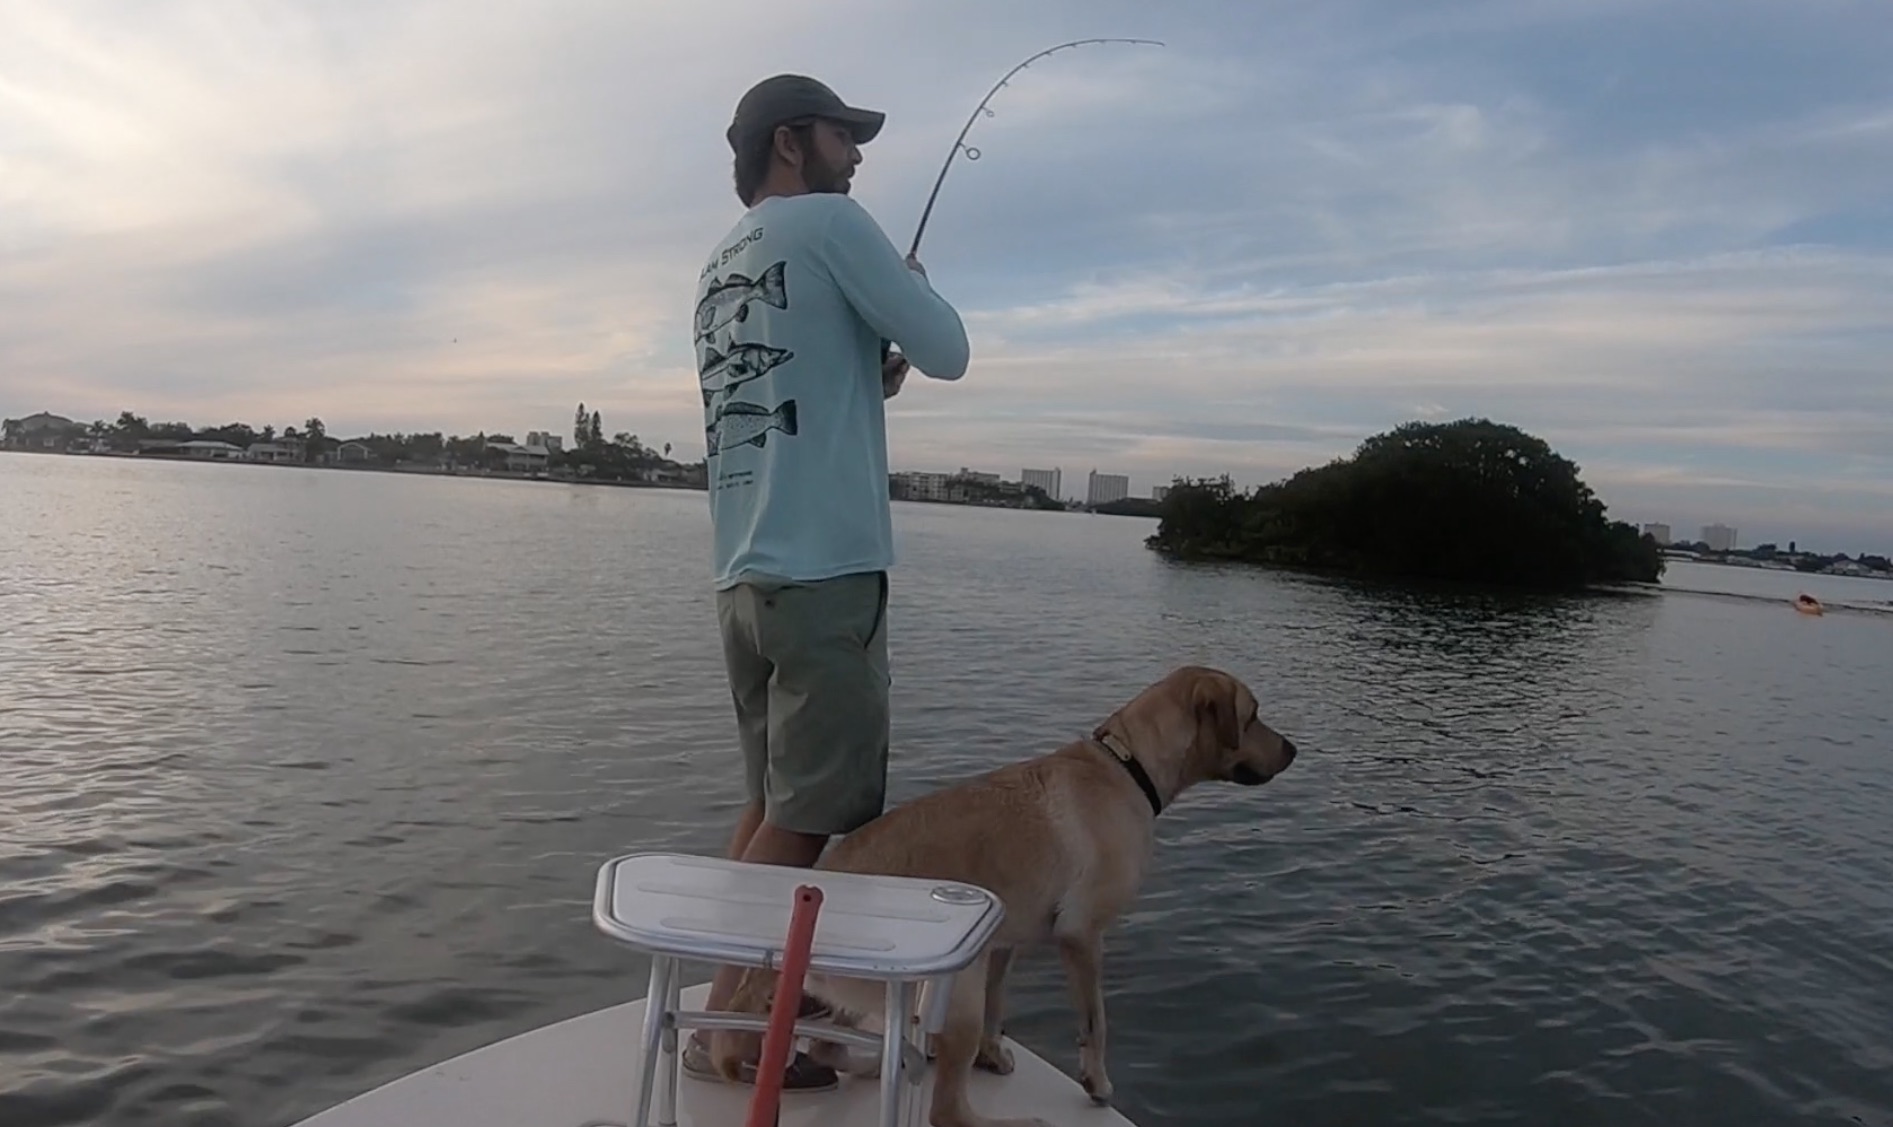 How To Retrieve Paddletail Lures To Catch Redfish, Snook, & Seatrout